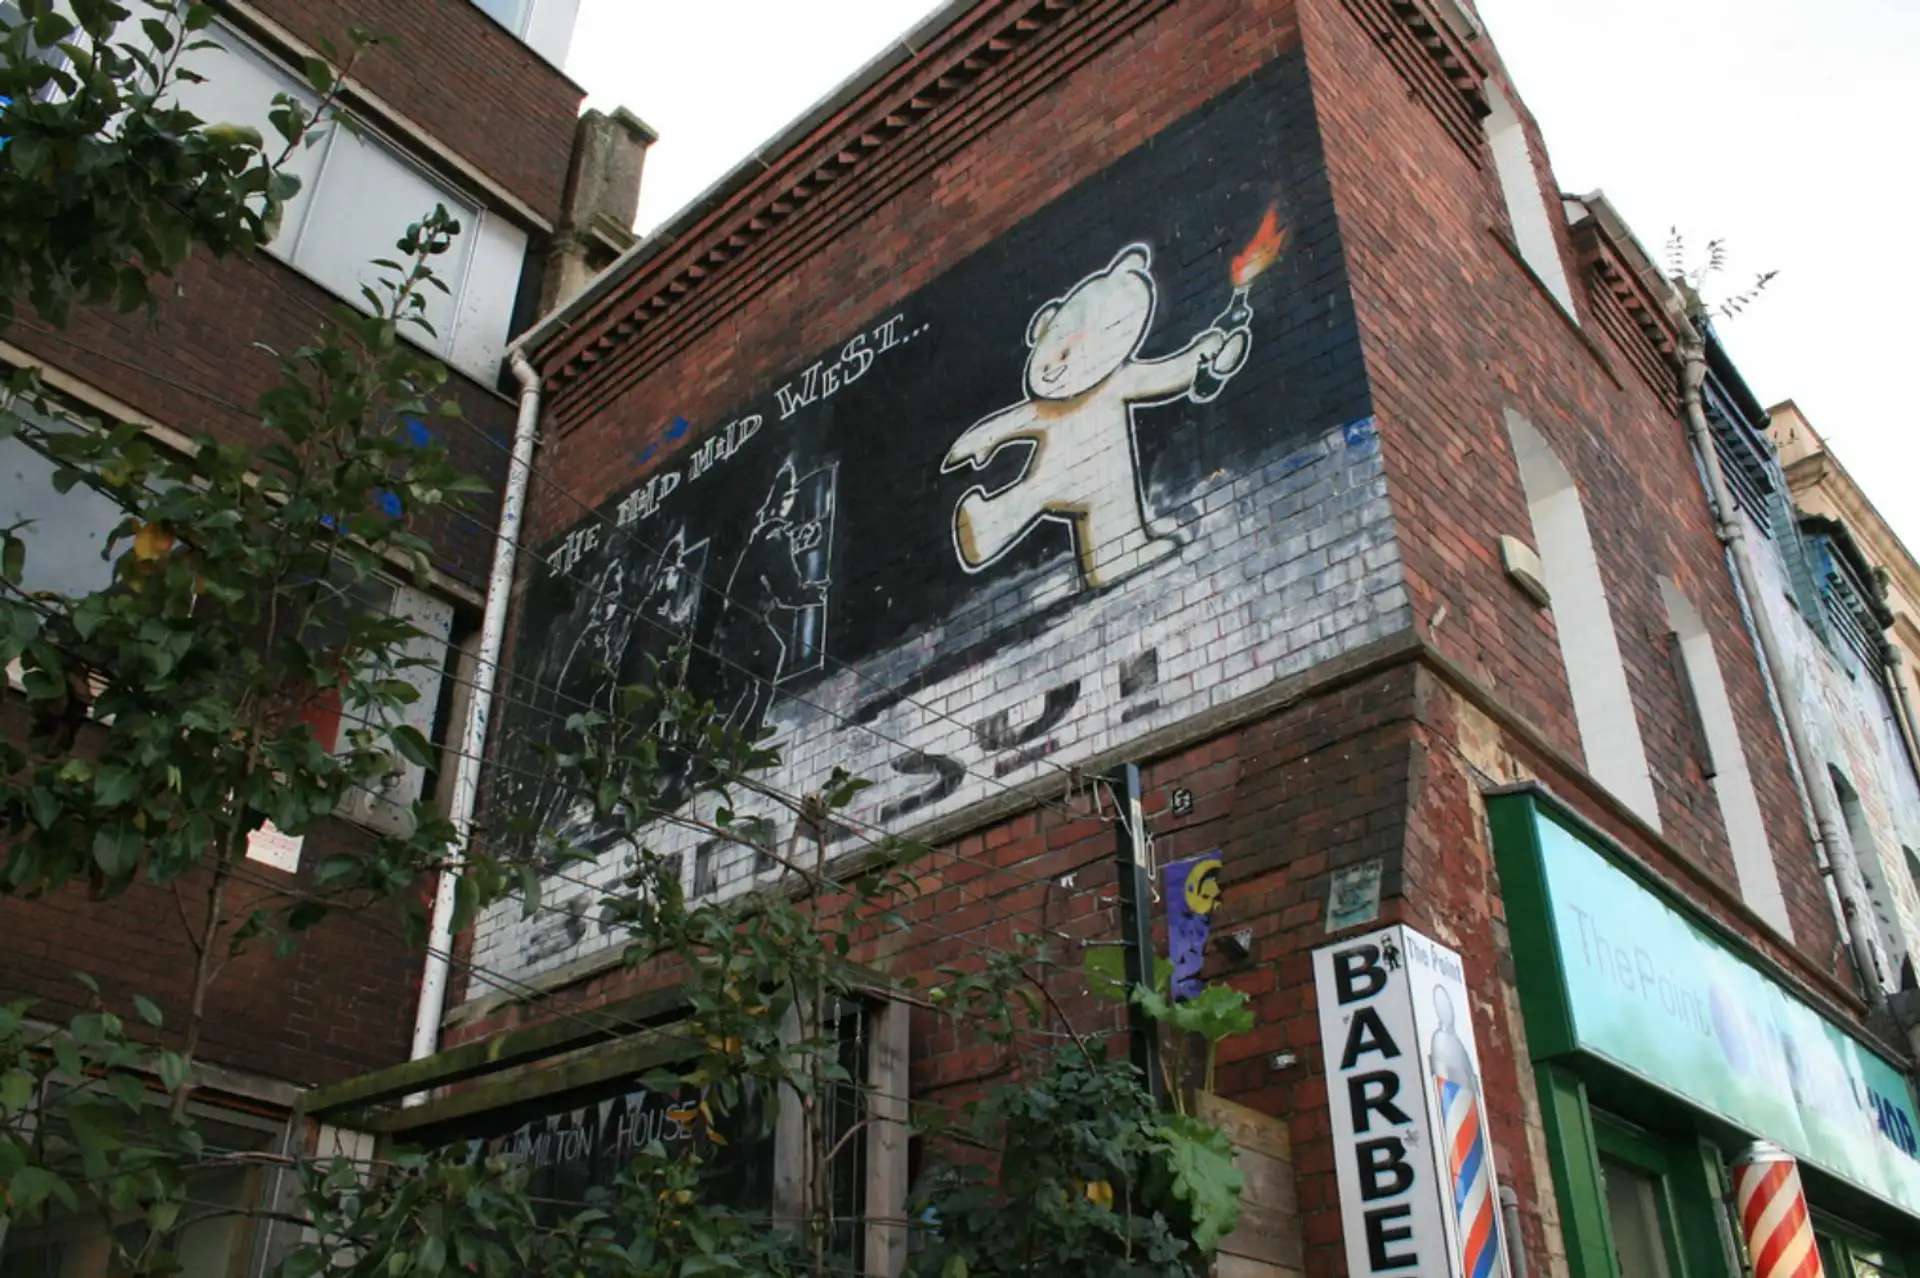 A photograph of Banksy's Mild Mild West in-situ graffiti work, depicting a teddy bear throwing a petrol bomb at three riot policemen.